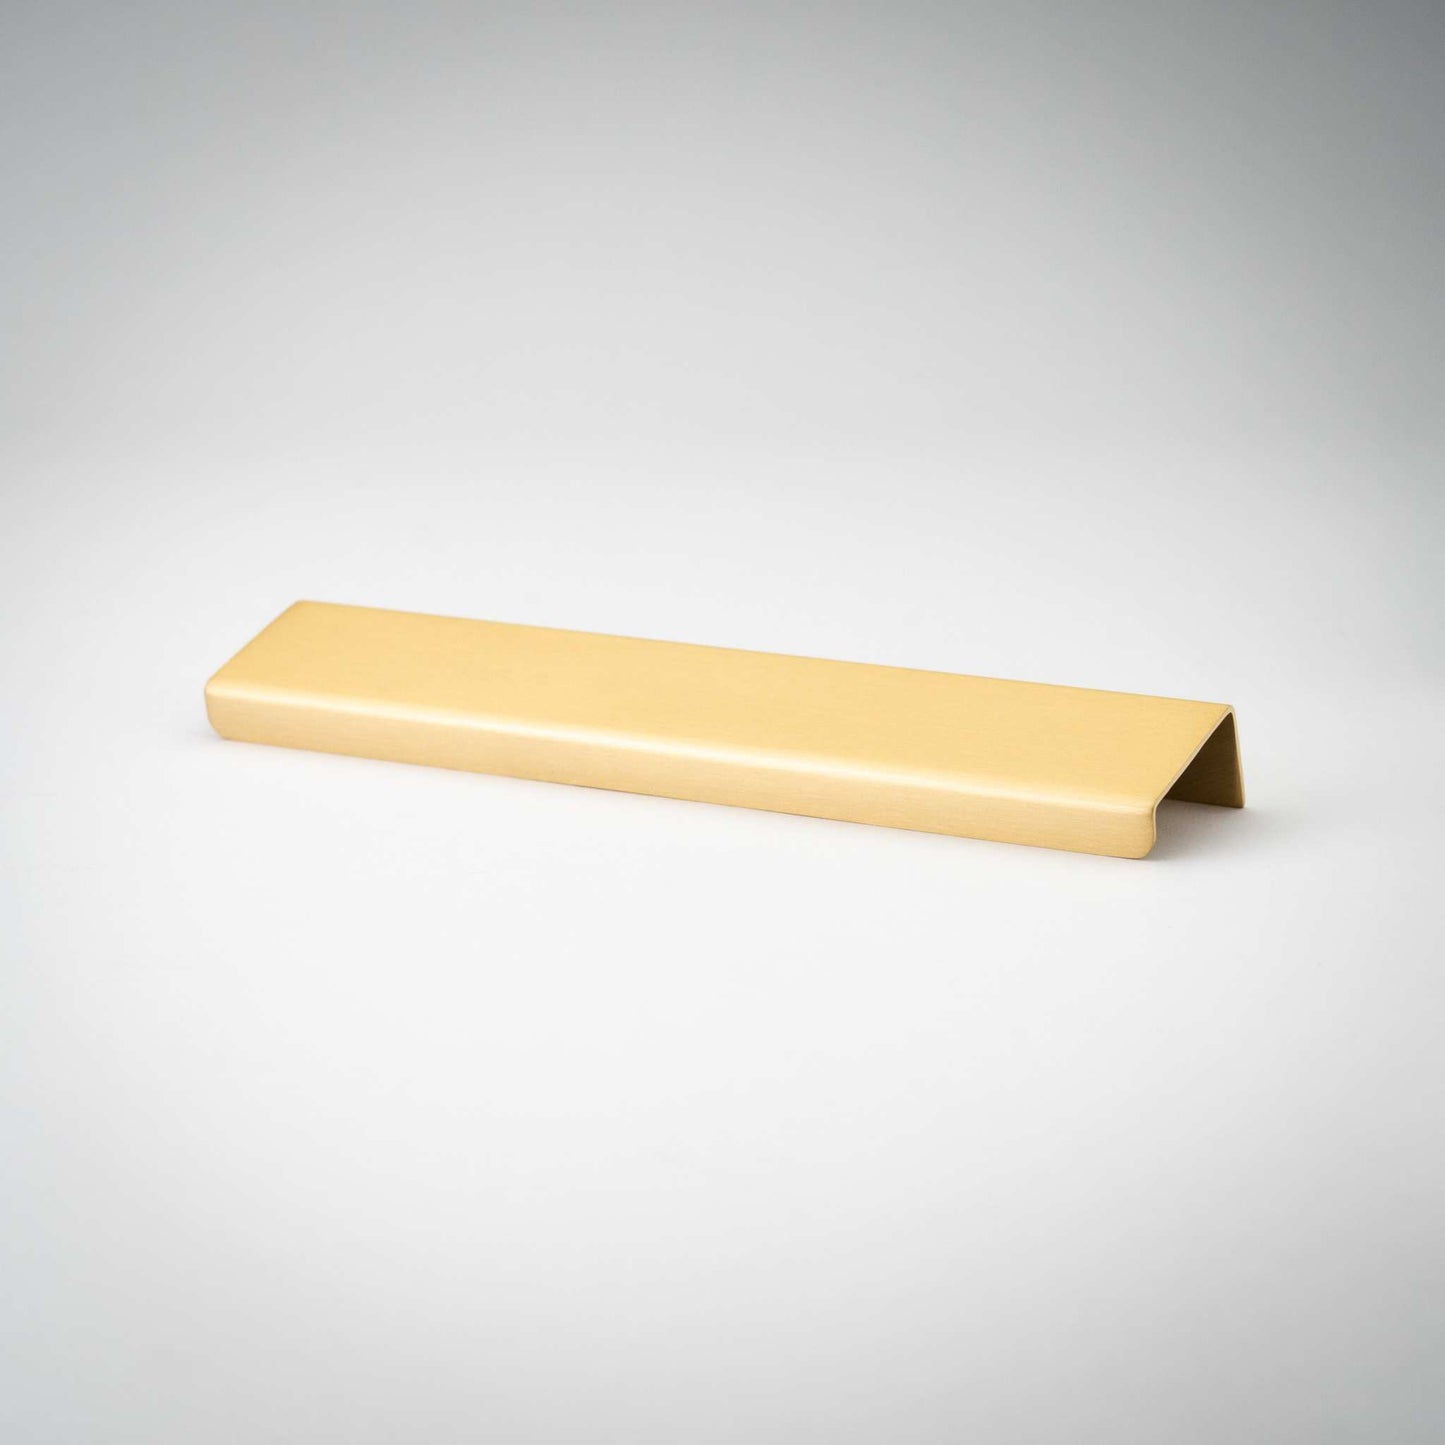 Verge, Solid Brass Edge Pulls


Meet our new line of Verge Edge Pulls.  Similar in weight and feel to our Grip Edge pull, but now available at more accessible price. The solid and heavy brass copullVerge, Solid Brass Edge Pulls